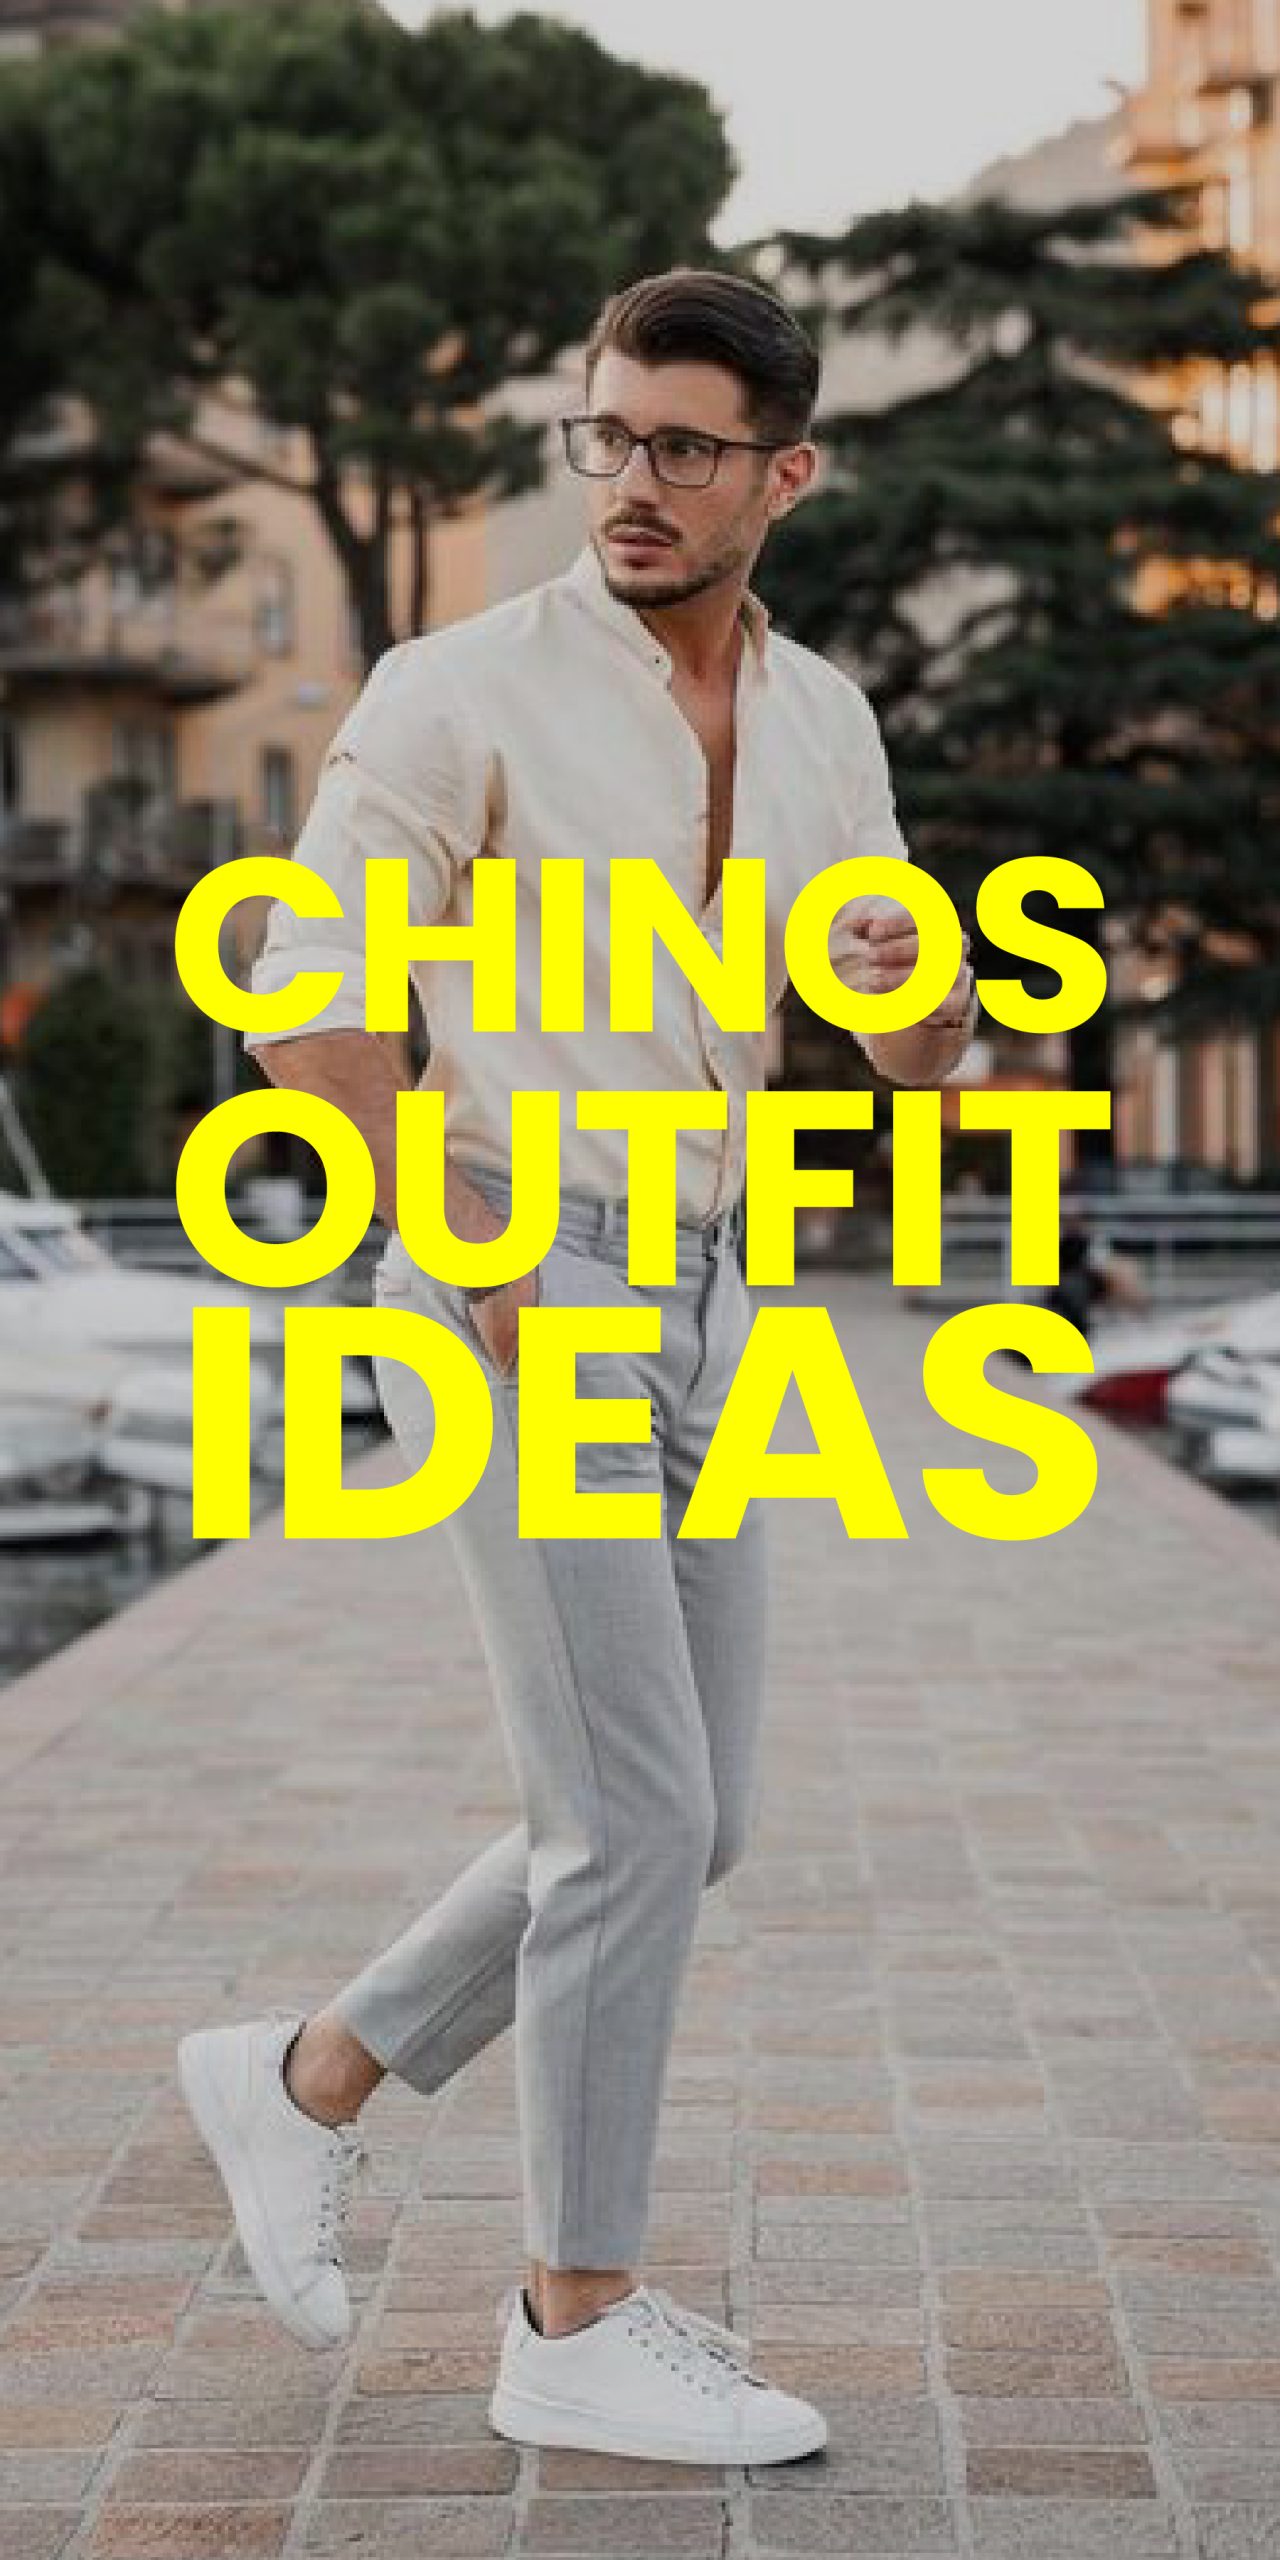 CHINOS OUTFIT IDEAS